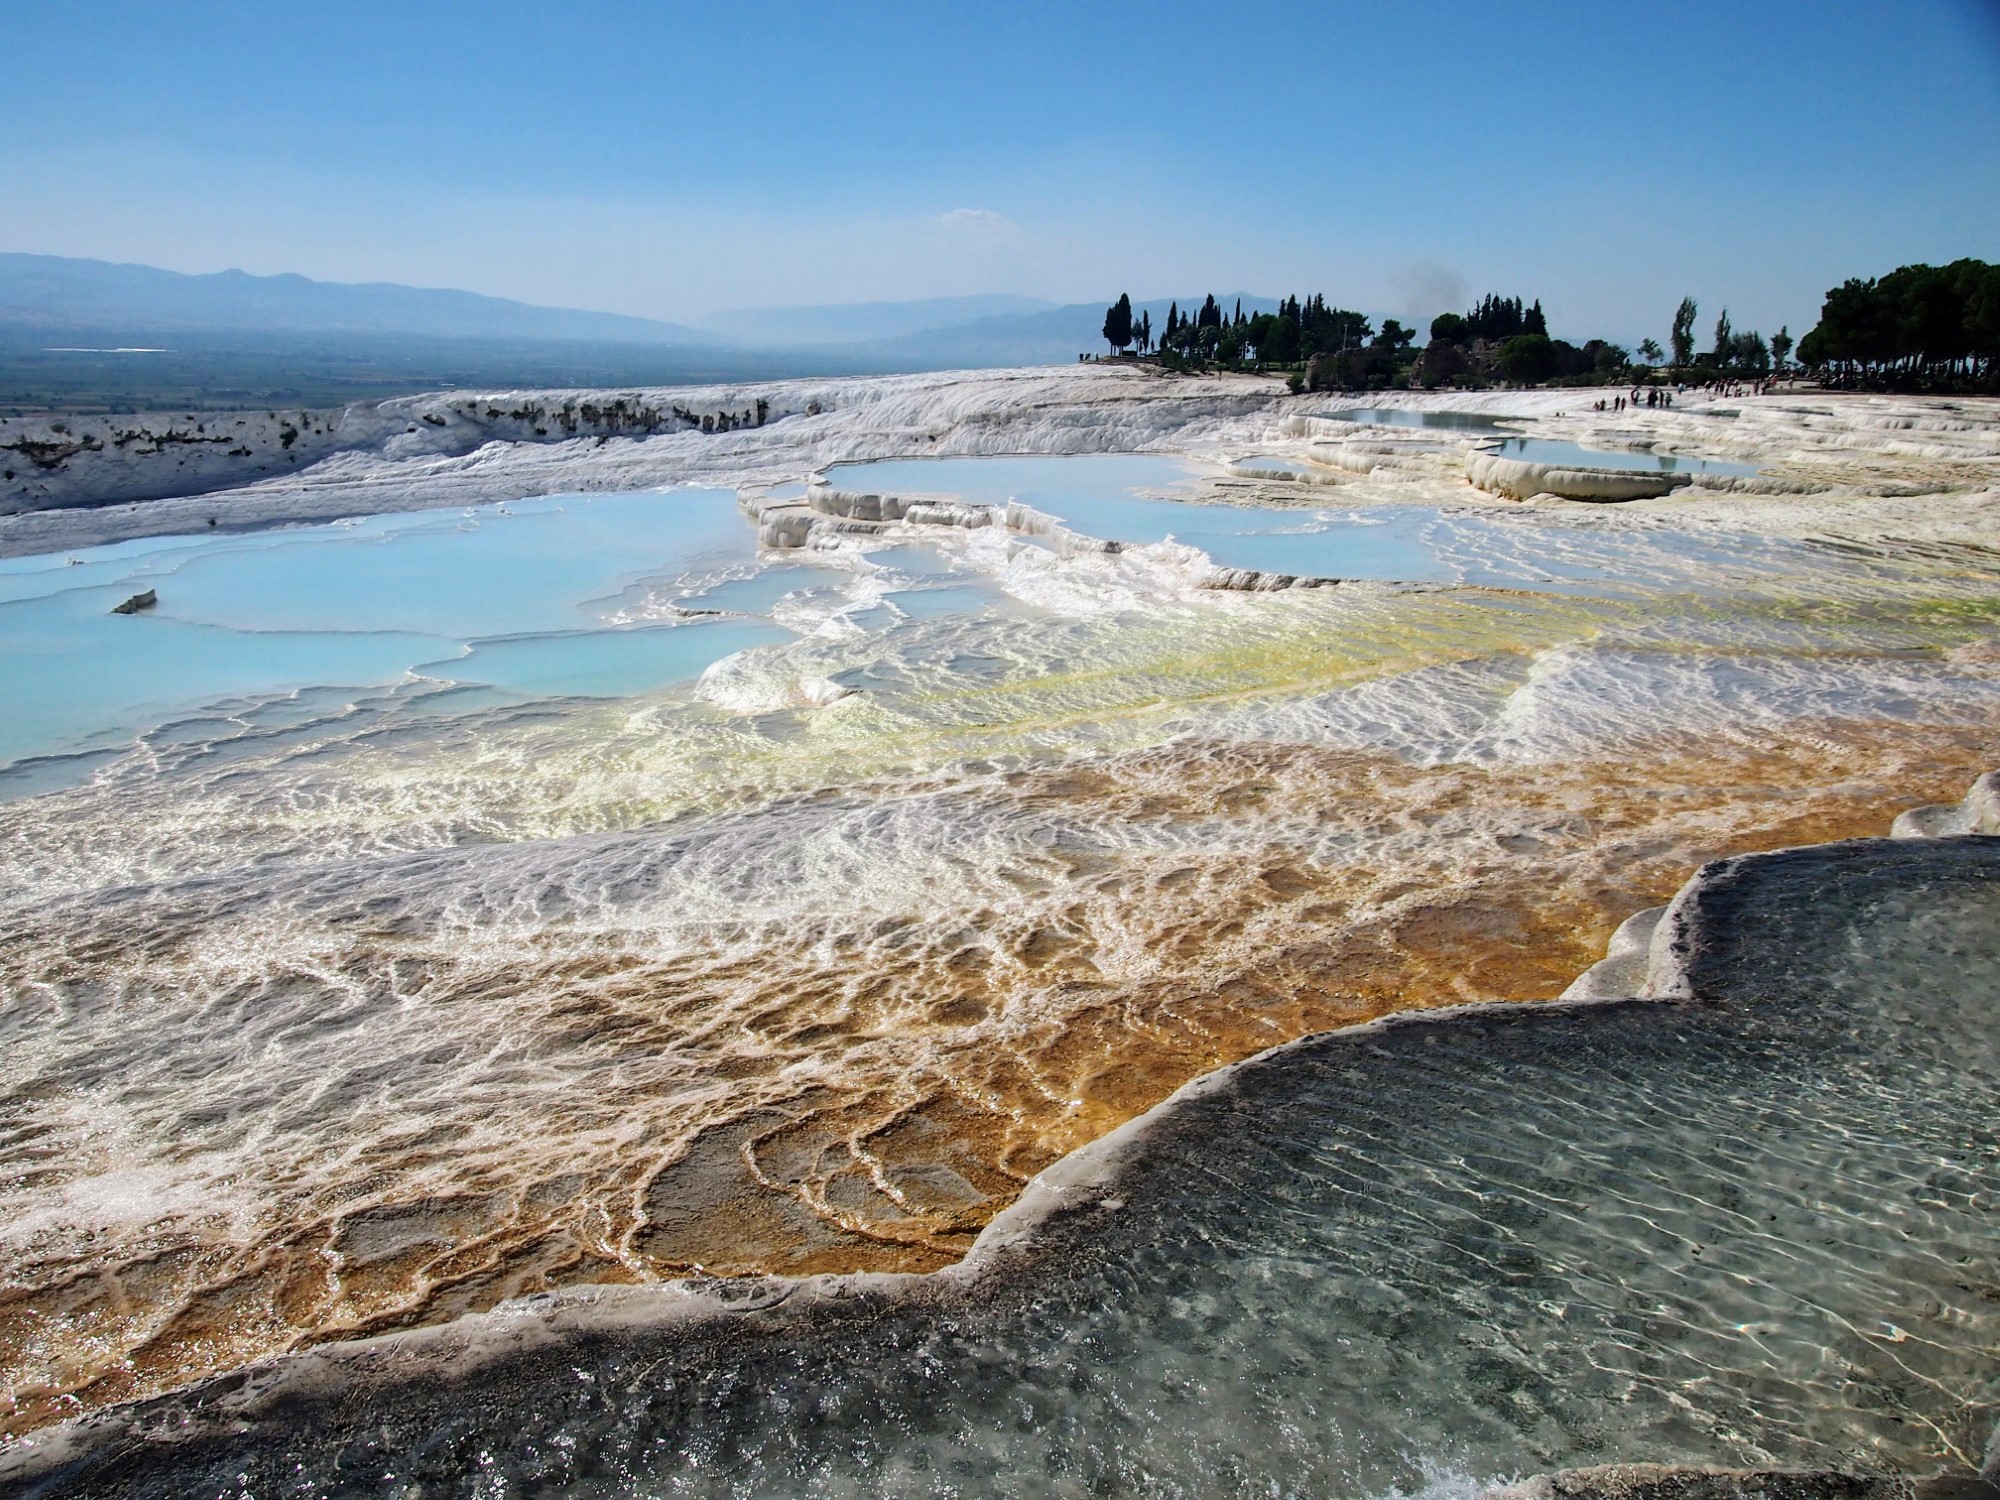 Wide overview of the travertine at Pamukkale with several different colors and pools. People visible in the distance